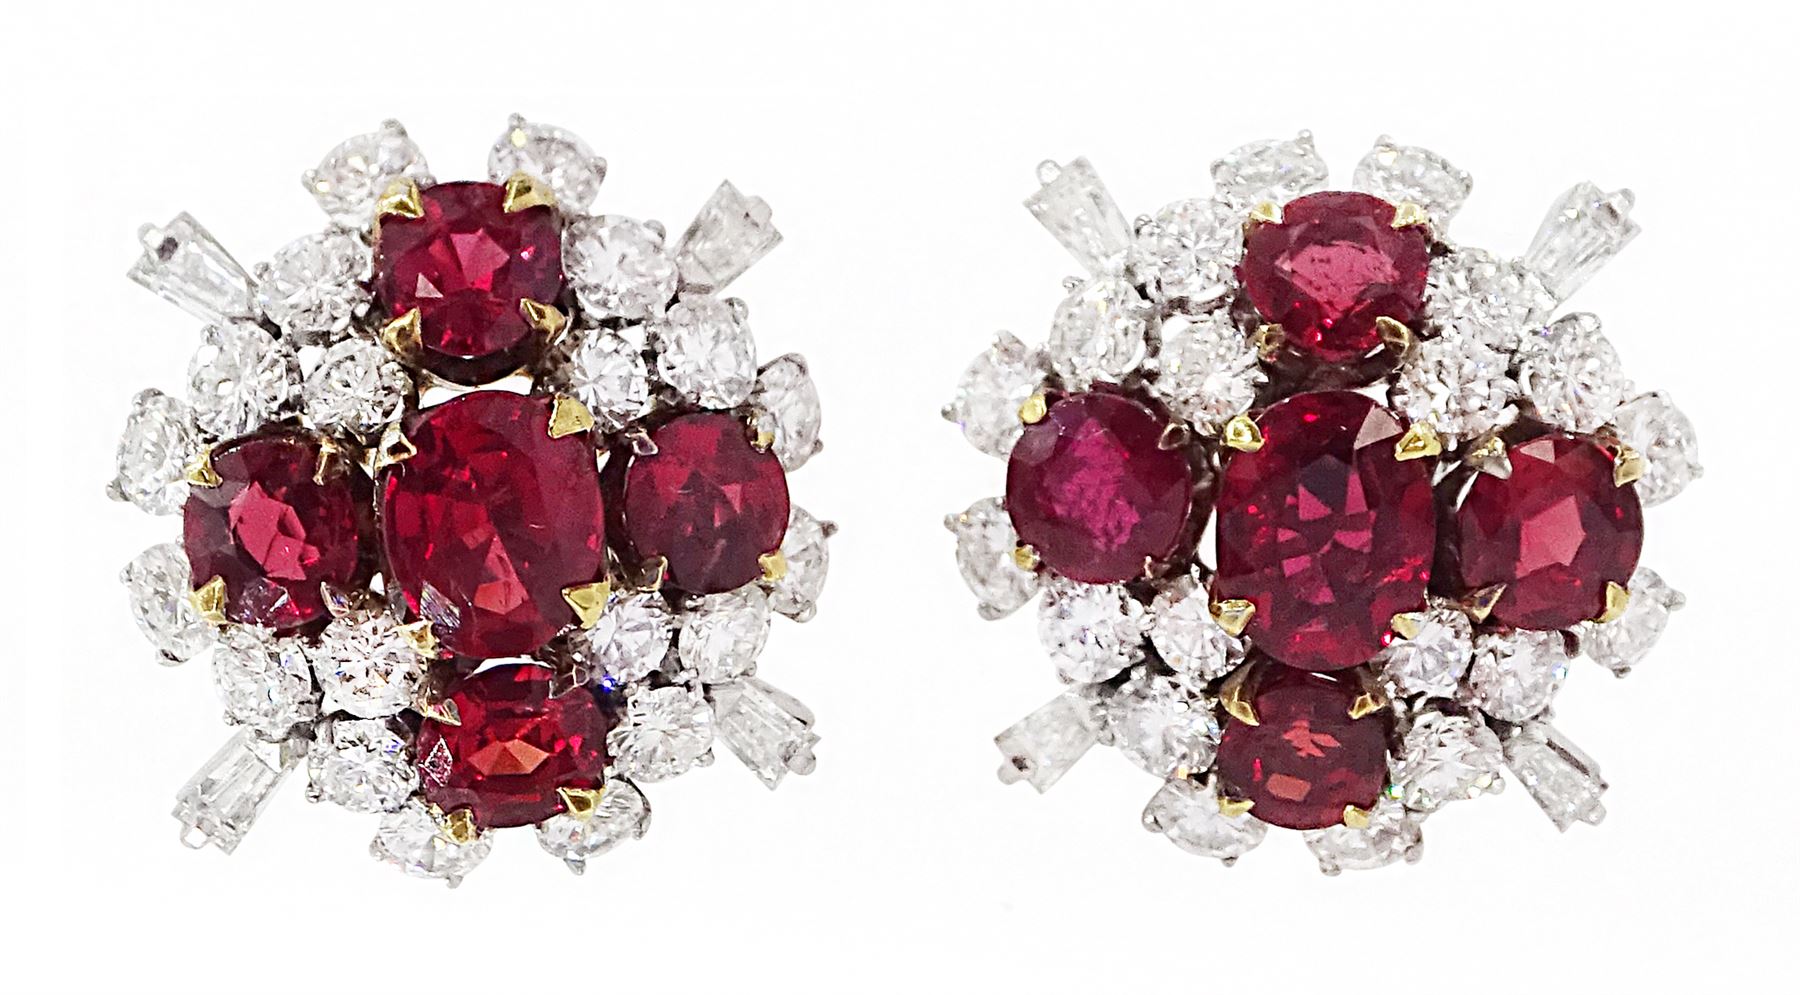 Pair of 18ct white and yellow gold Burmese ruby and diamond stud earrings